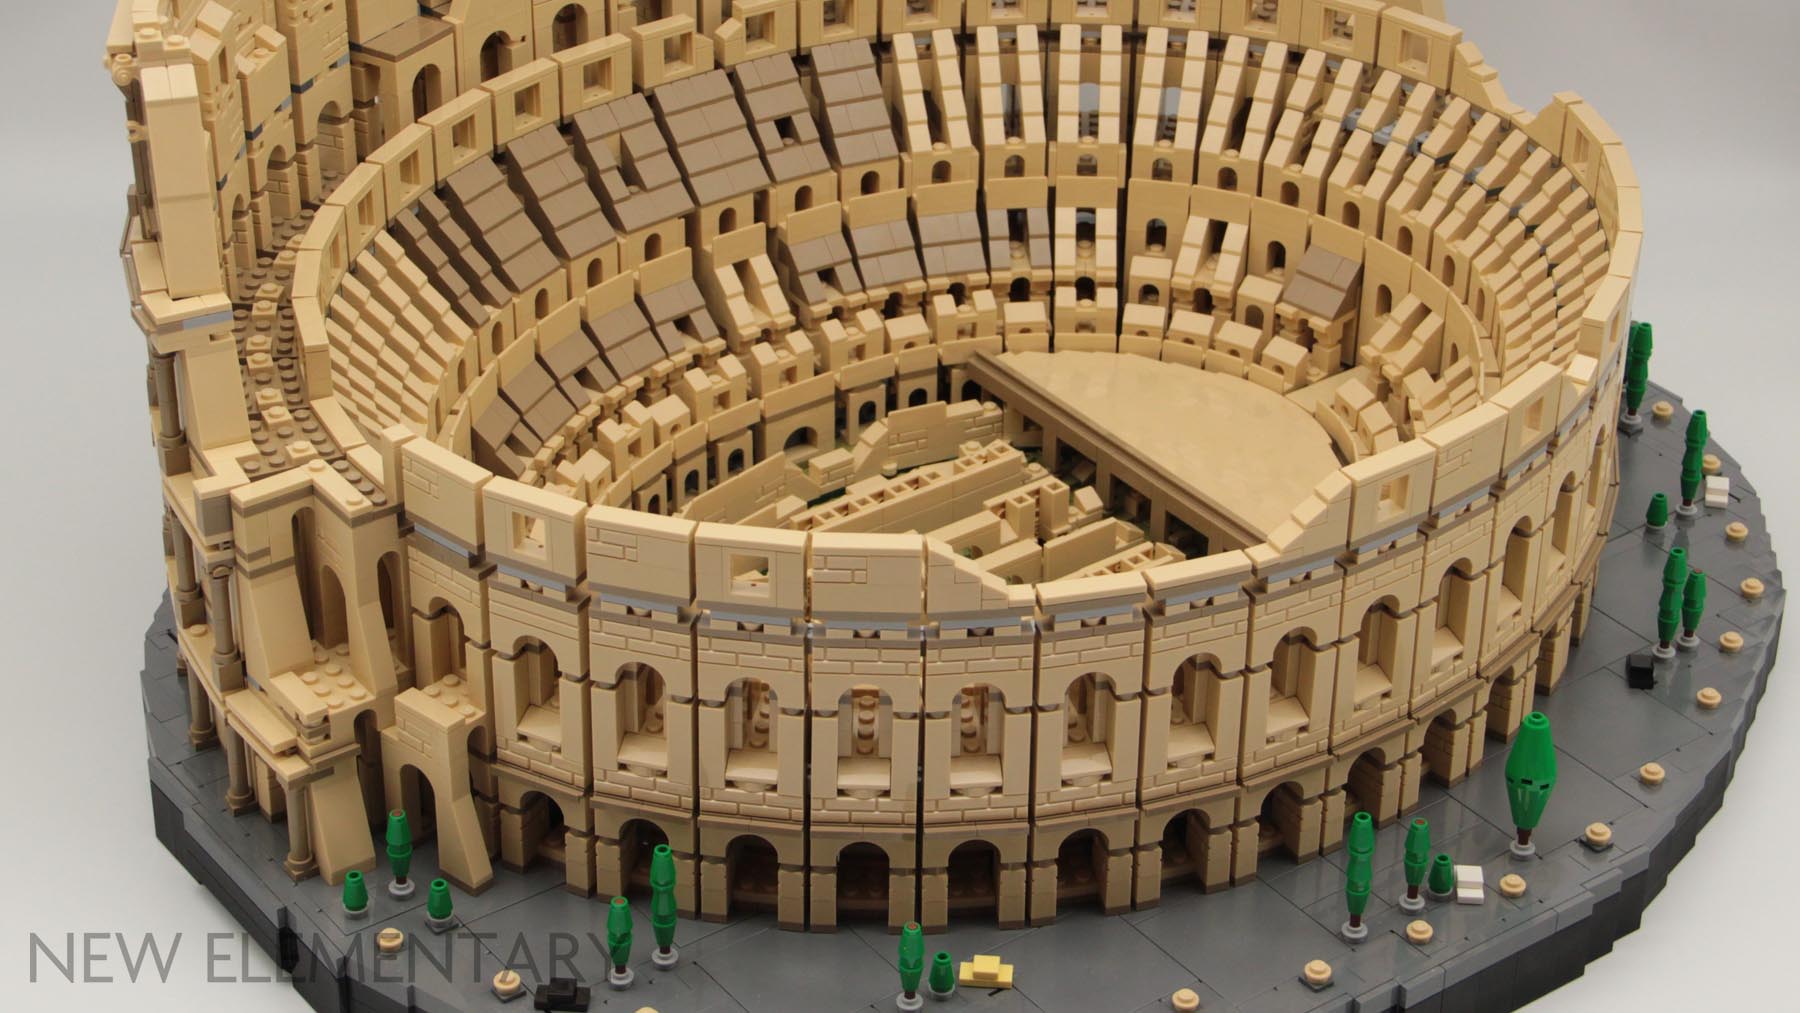 LEGO® parts review: 10276 Colosseum  New Elementary: LEGO® parts, sets and  techniques